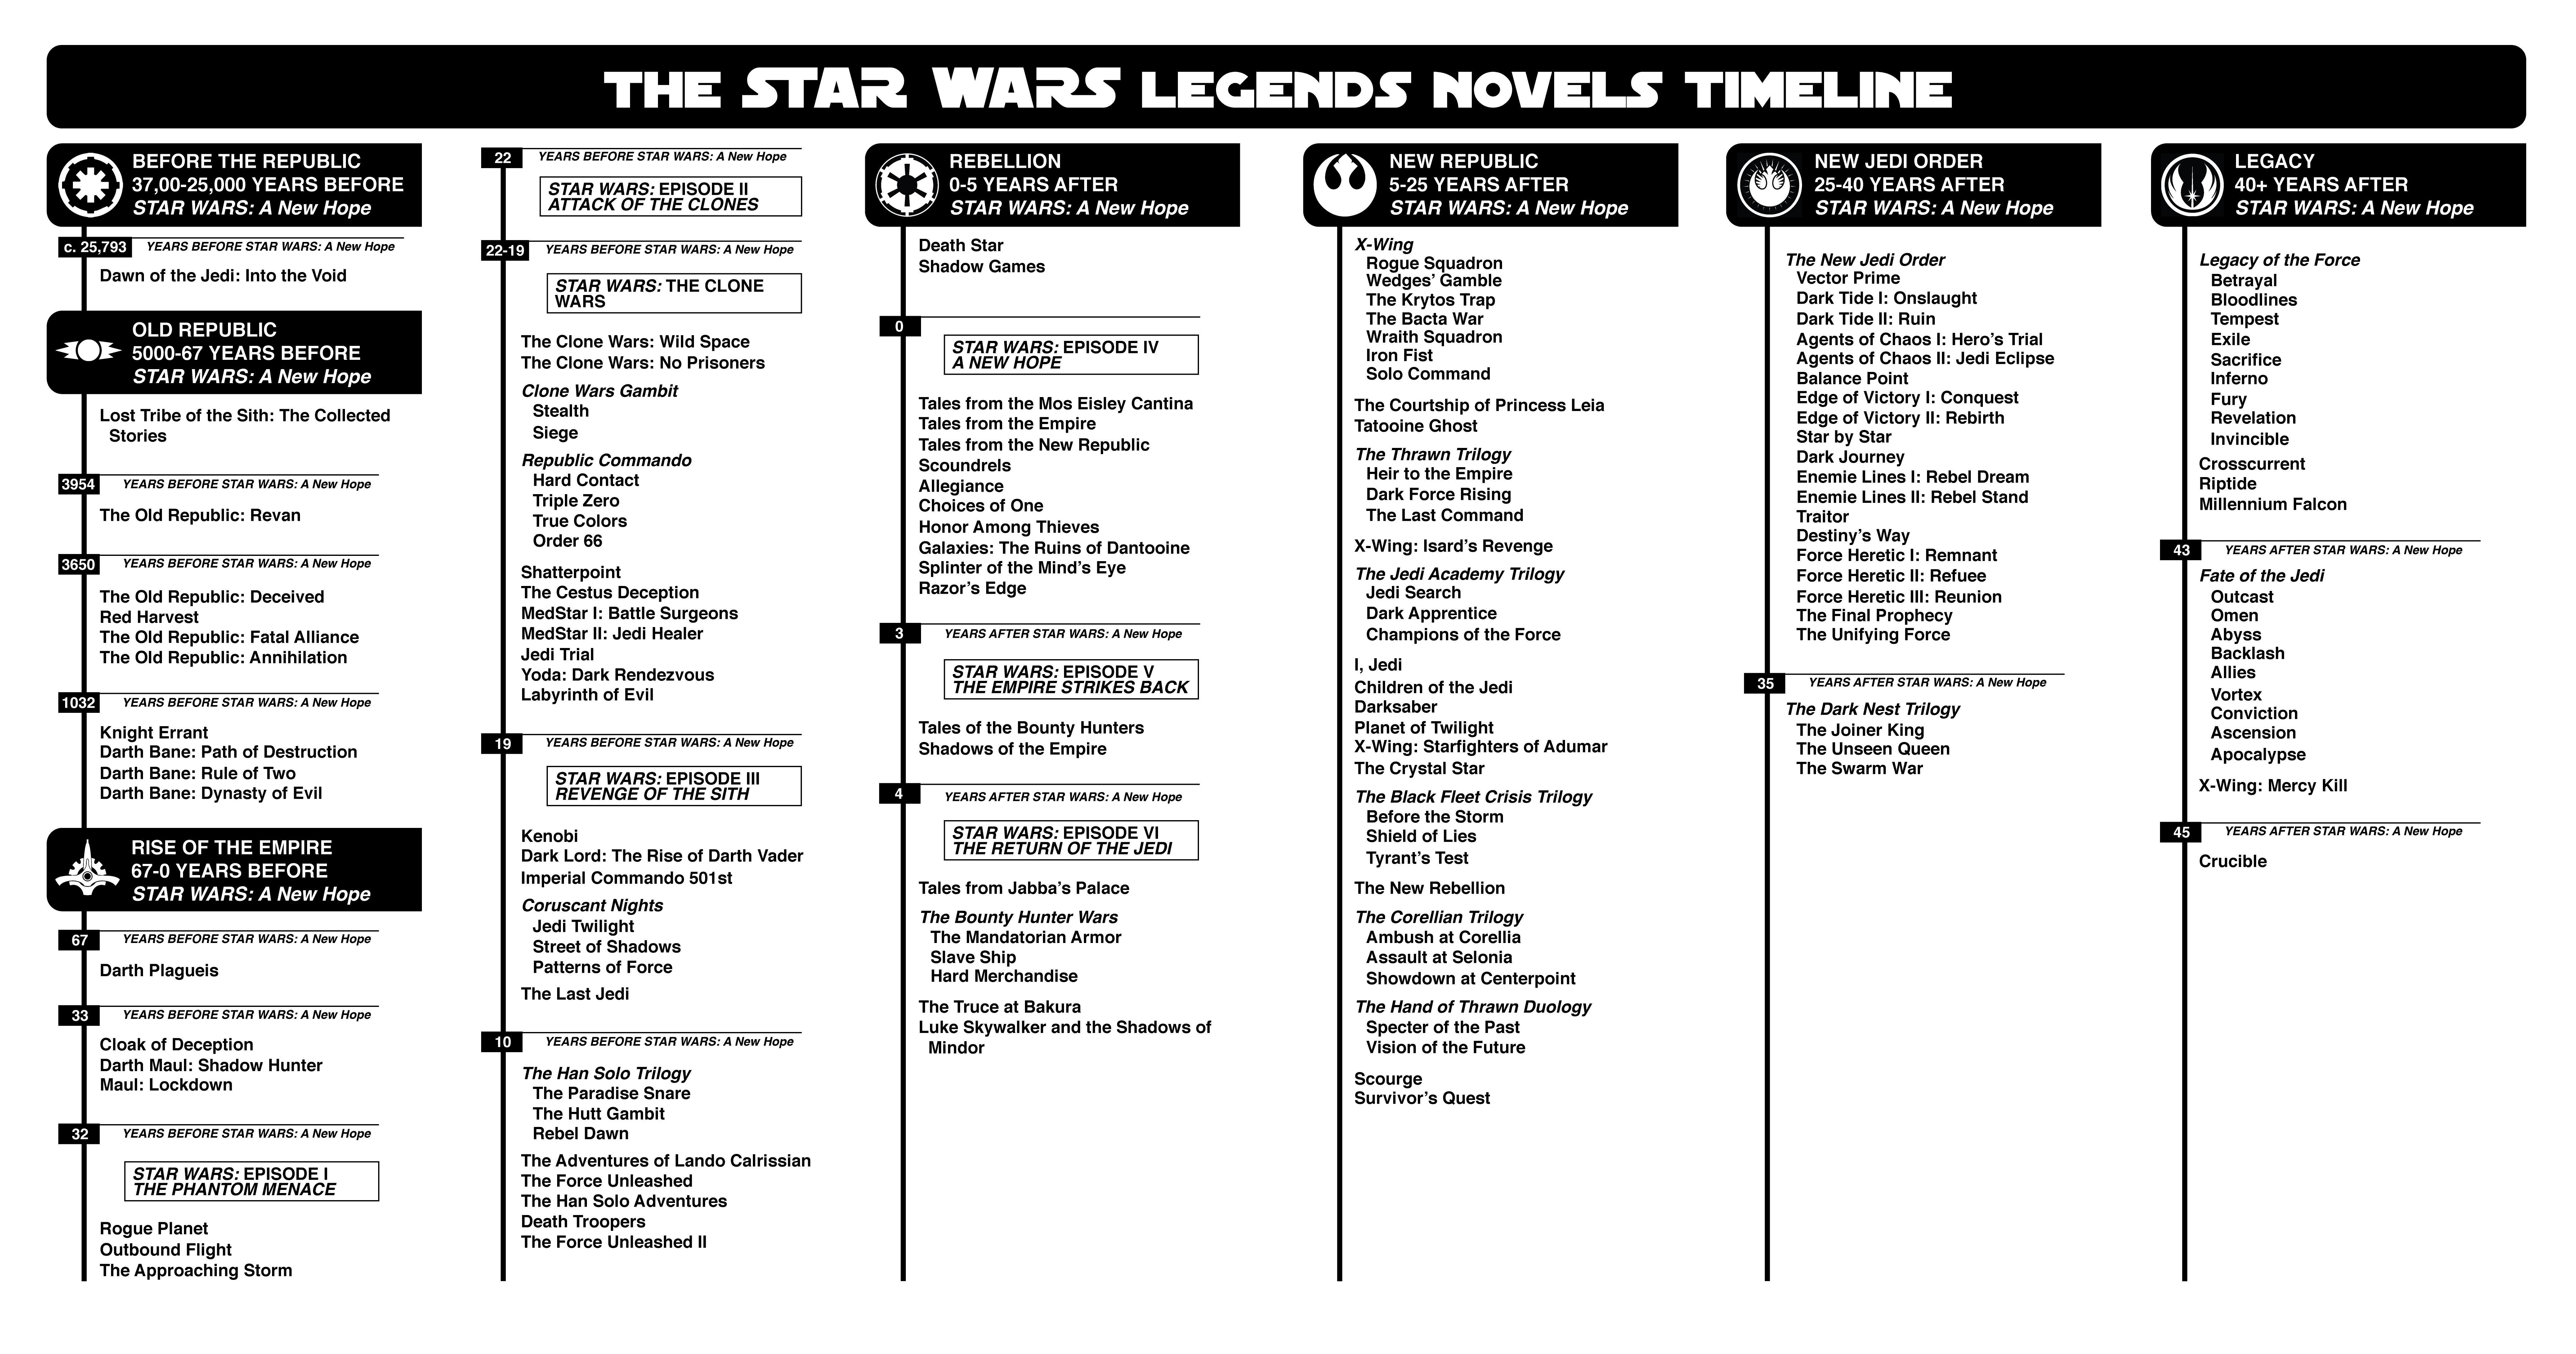 What are the best Star Wars books set in the Star Wars Legends timeline?